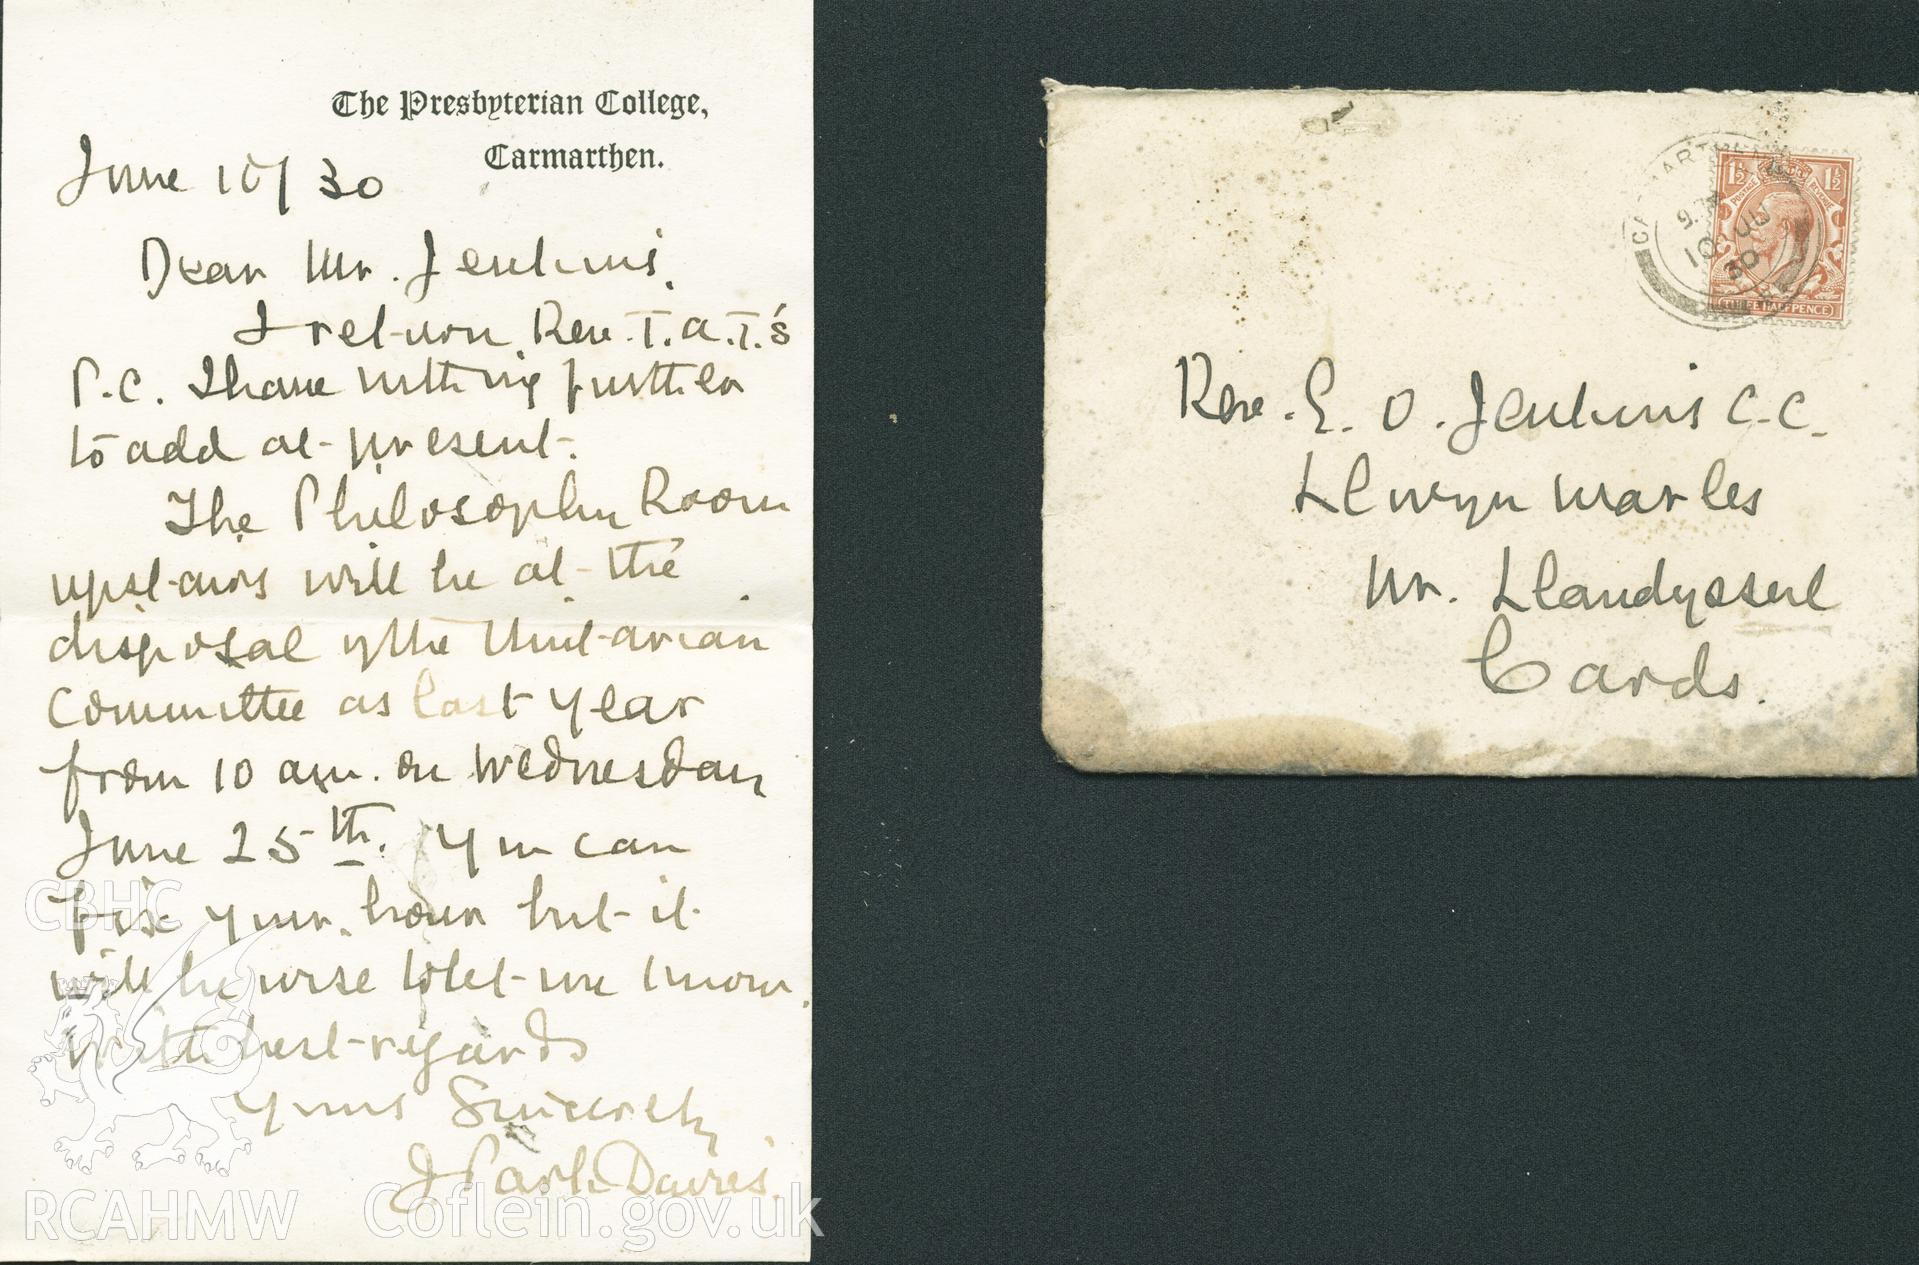 Handwritten letter addressed to the Rev. Jenkins from the Rev. Davies, confirming that the Philosophers Room at the Presbyterian College, Carmarthen, would be available for the Unitarian Committee. Donated to the RCAHMW during the Digital Dissent Project.